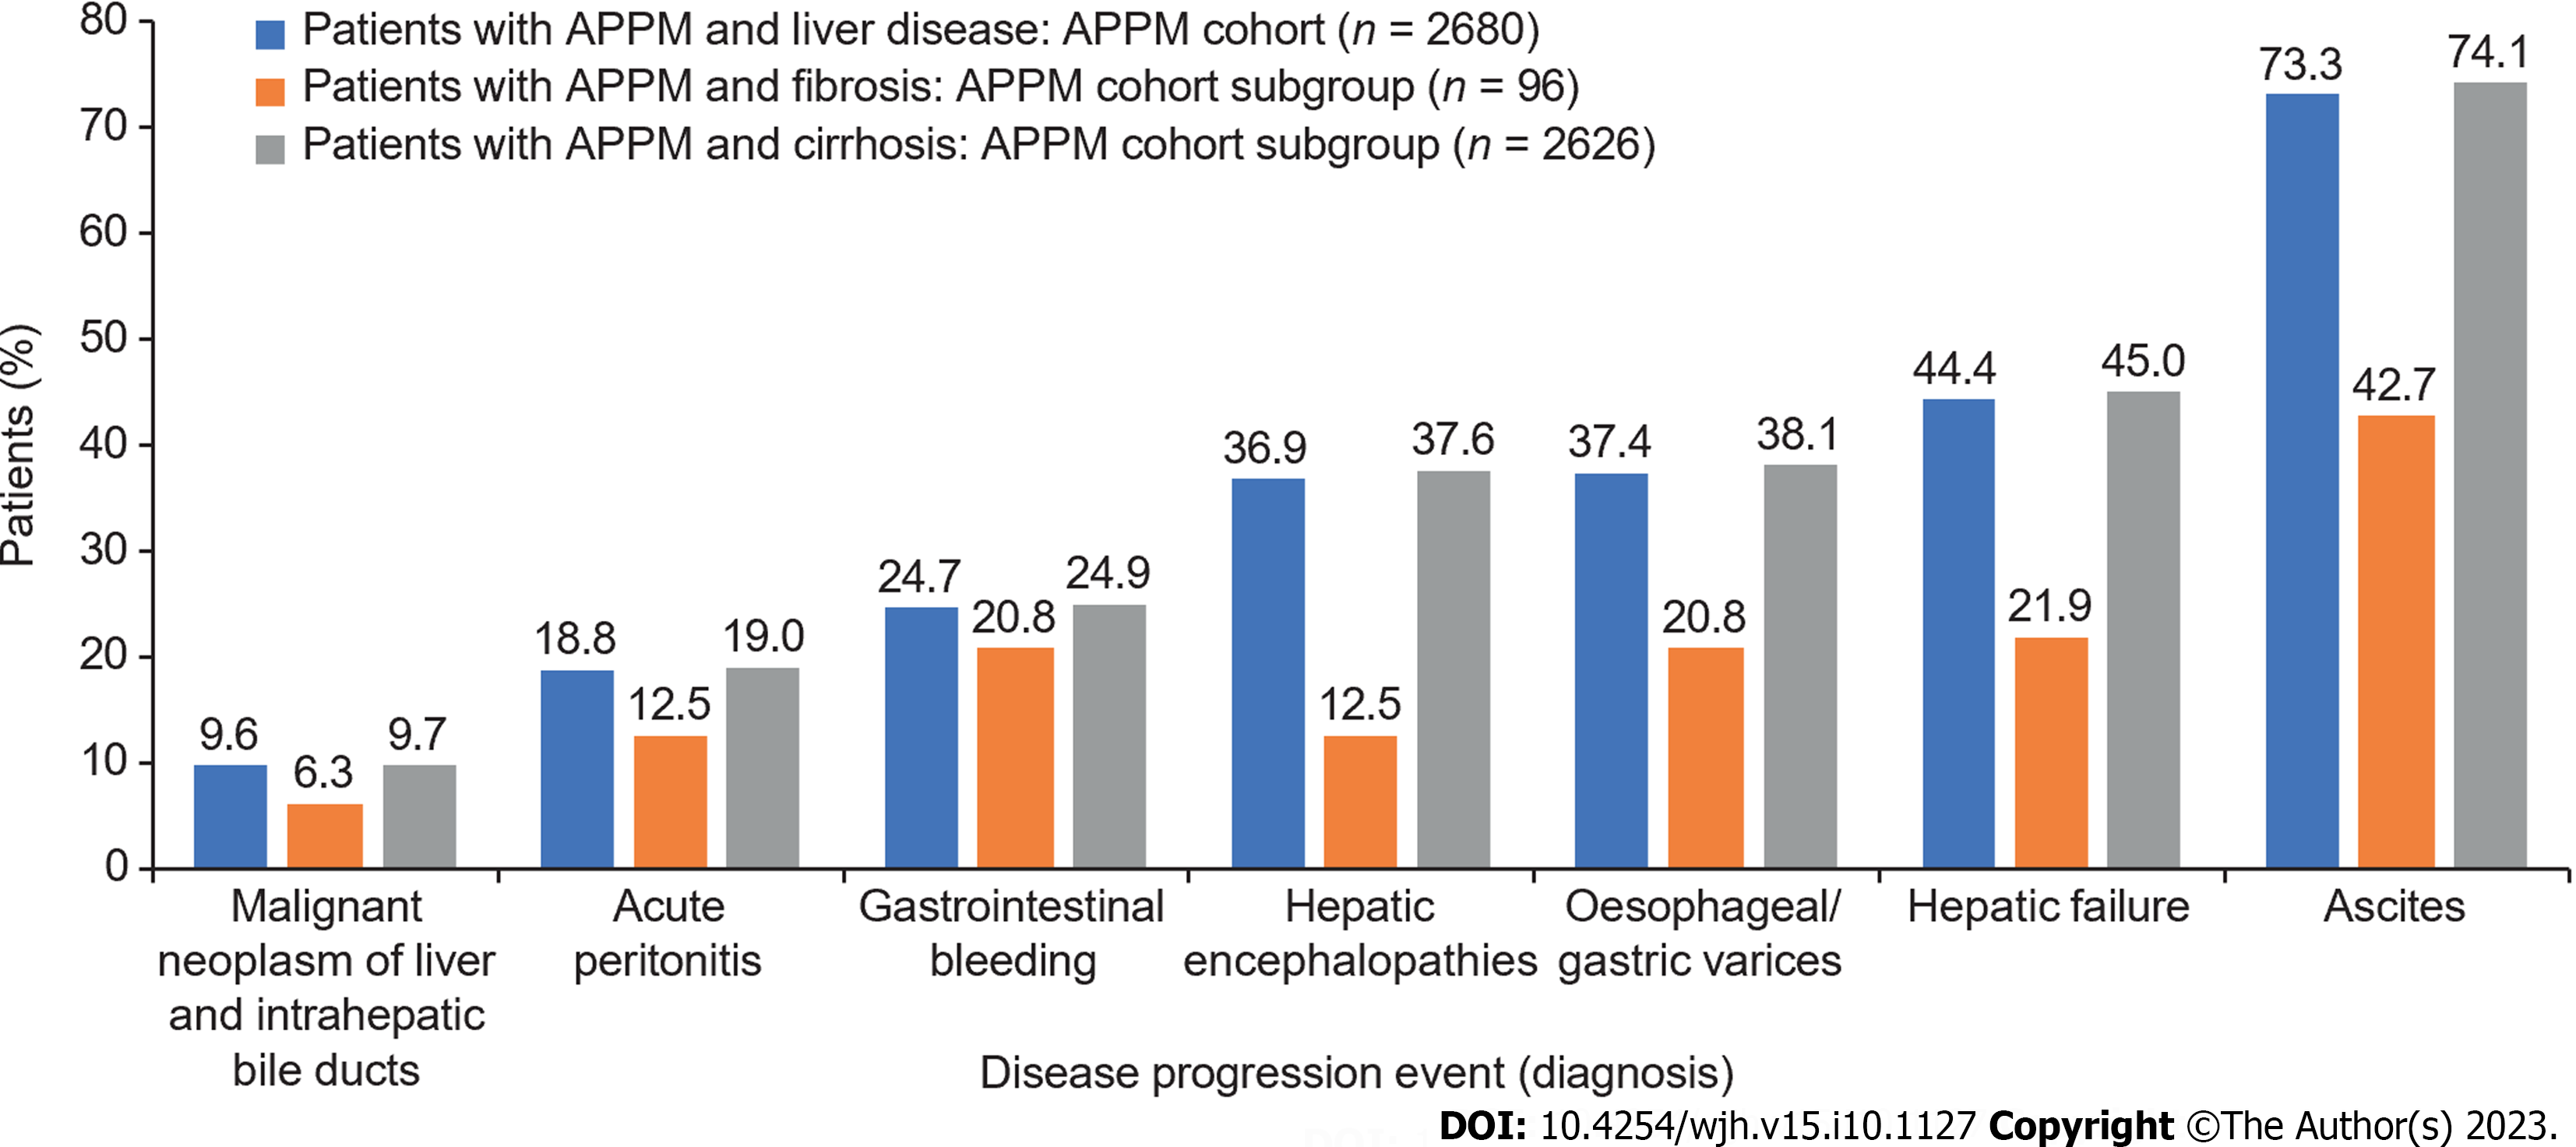 Liver disease epidemiology and burden in patients with alterations 